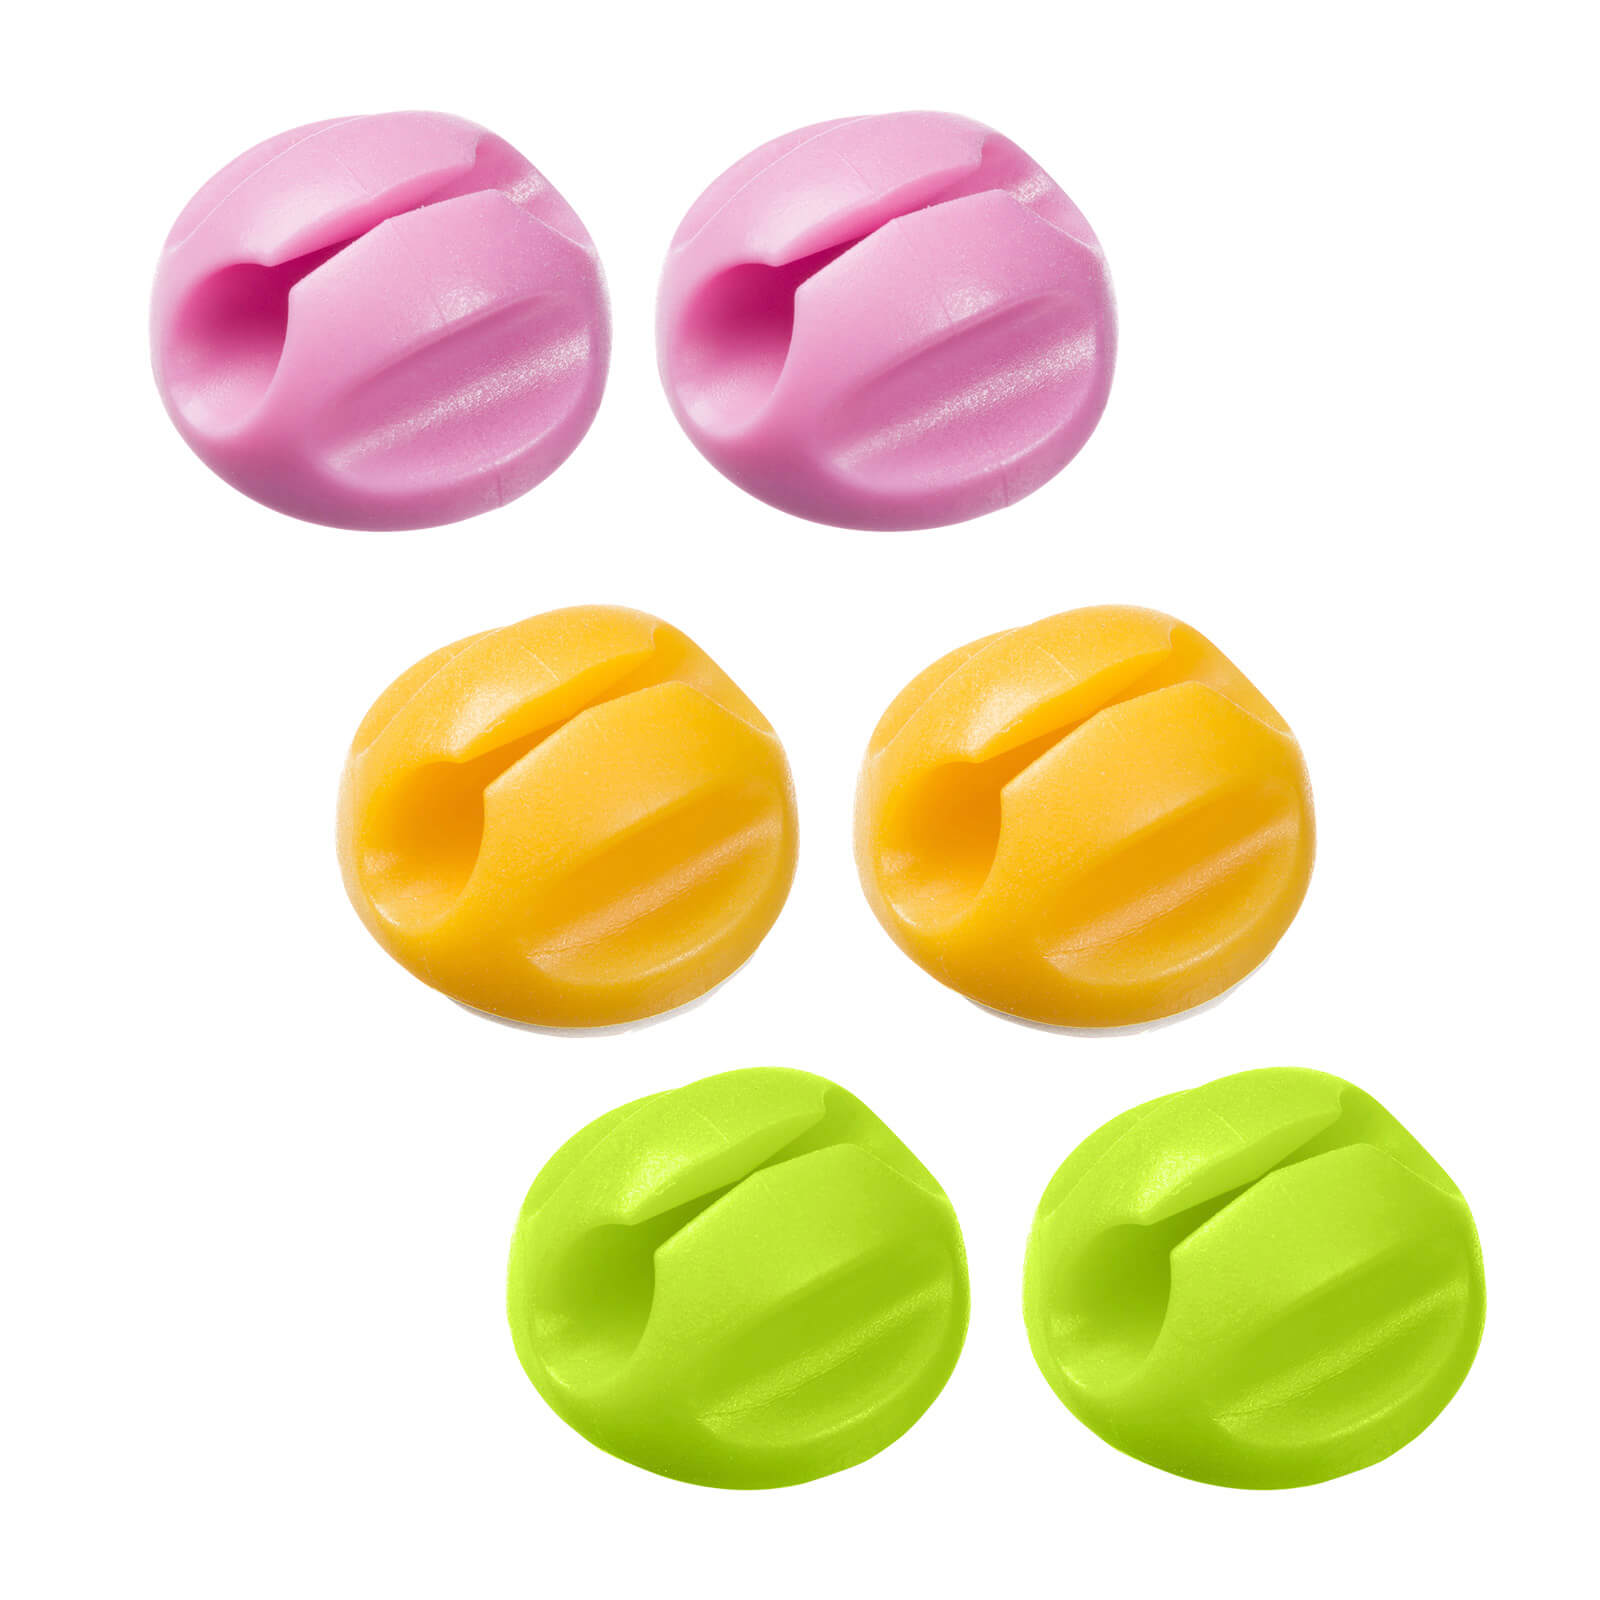 D-Line Cable Tidy Bases - 6pack incl - 2x Pink, 2x Yellow, 2x Green